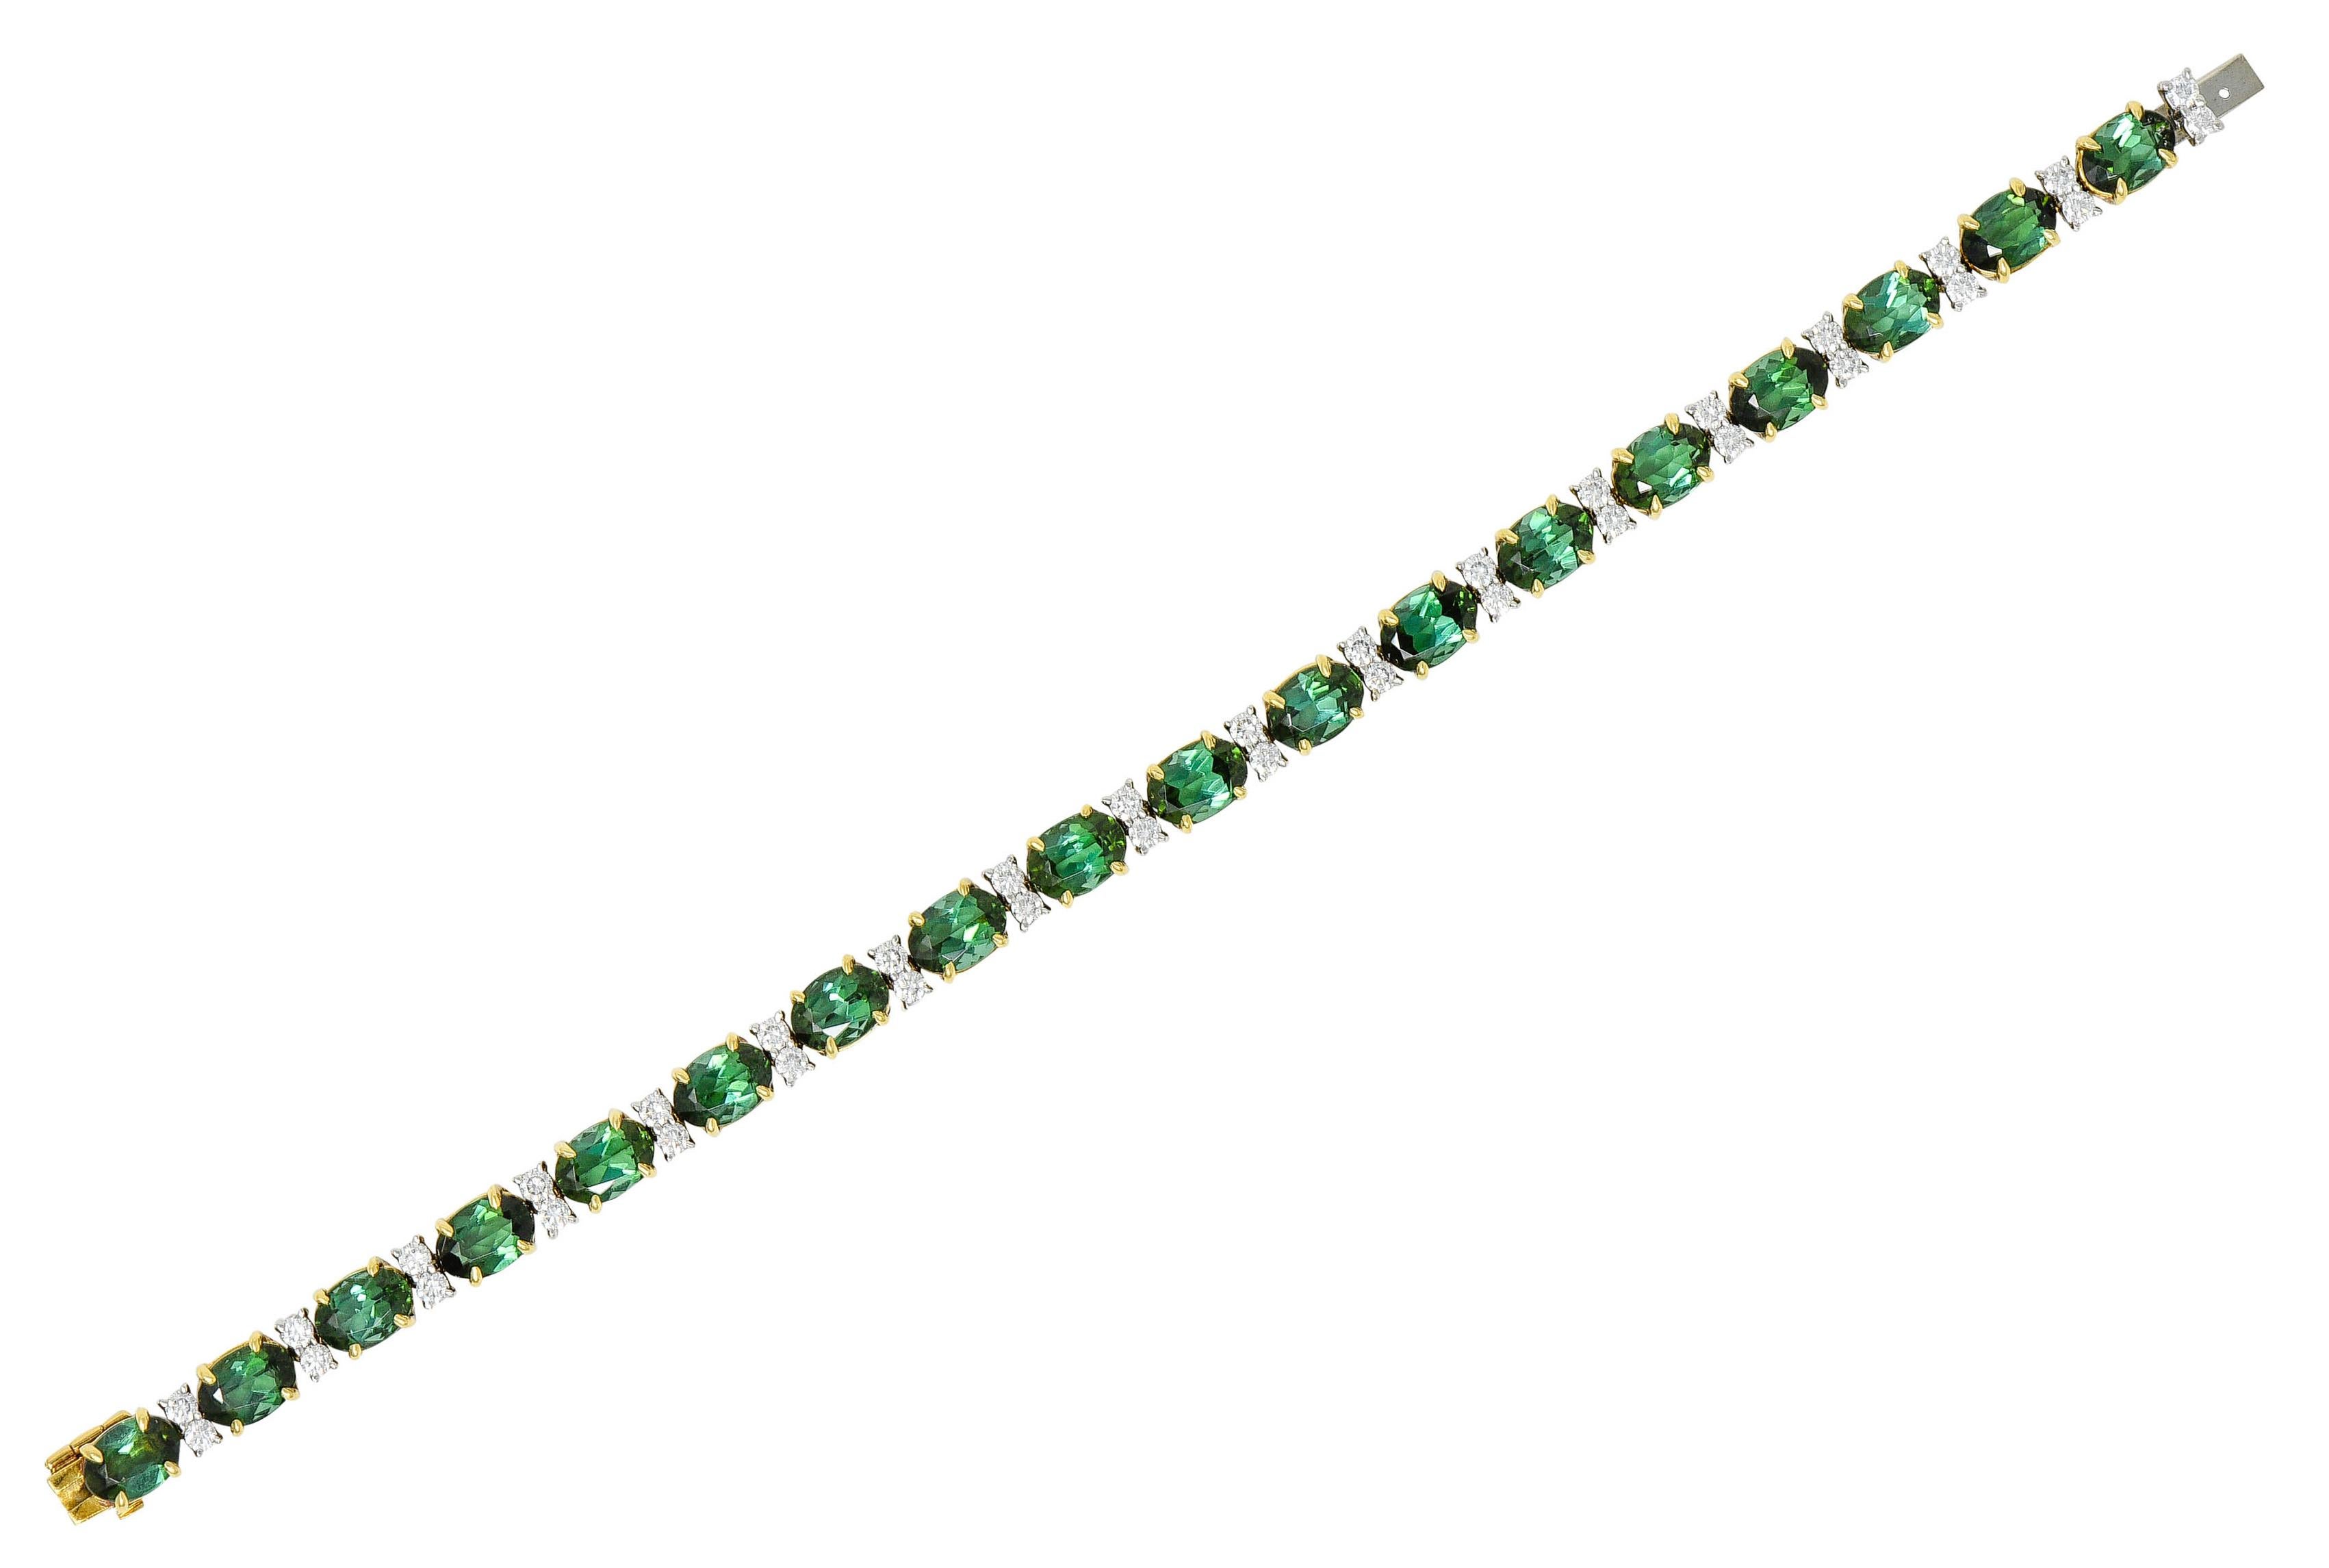 Tennis style bracelet is comprised of green tourmalines alternating with pairs of round brilliant cut diamonds

Tourmalines are oval cut and very well matched in evergreen color

Talon set in yellow gold baskets while measuring approximately 7.0 x